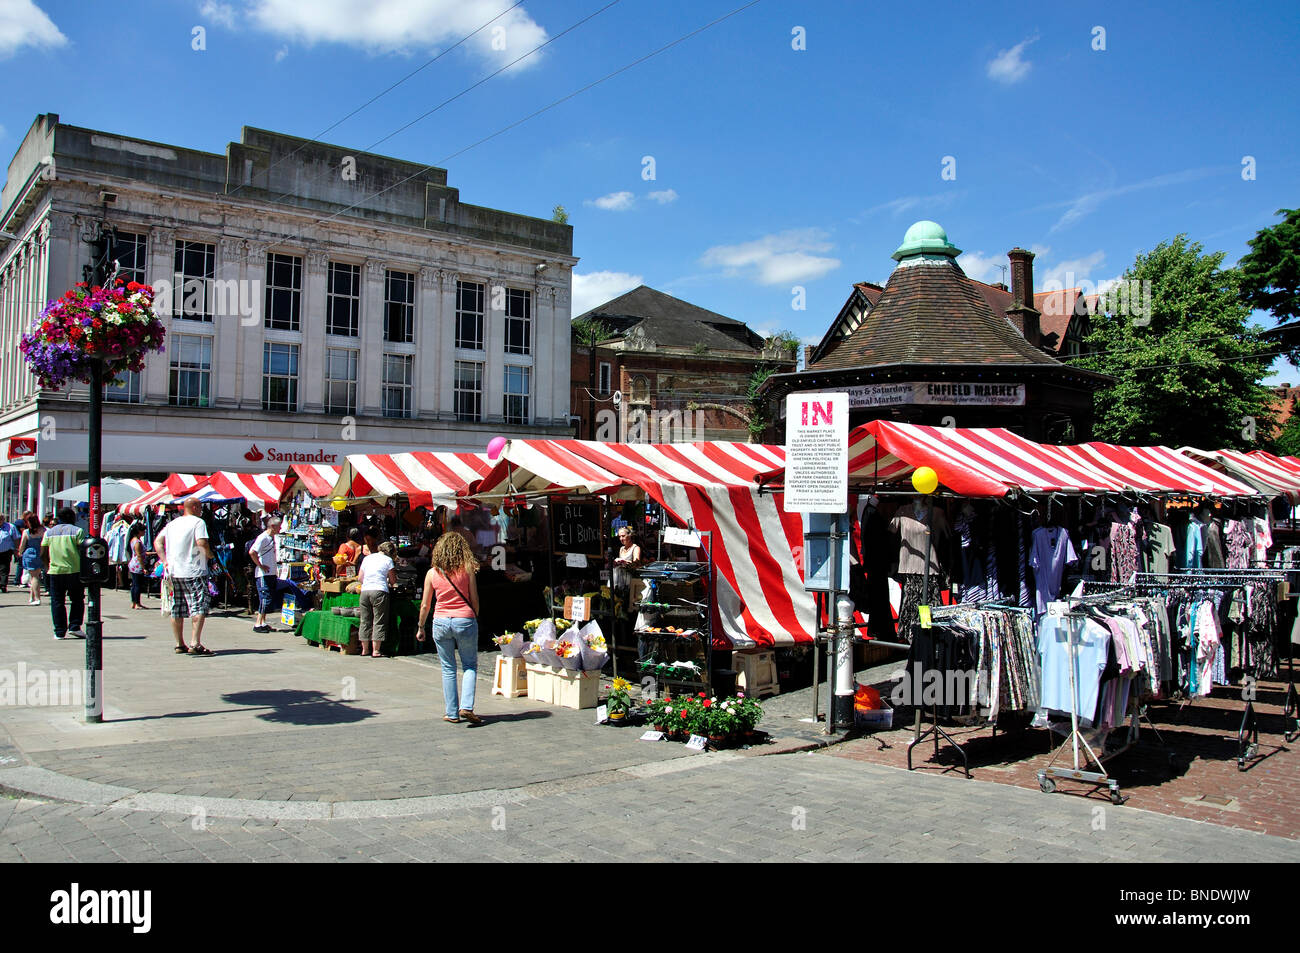 Enfield Market, Market Square, Enfield Town, London Borough of Enfield, Greater London, England, United Kingdom Stock Photo